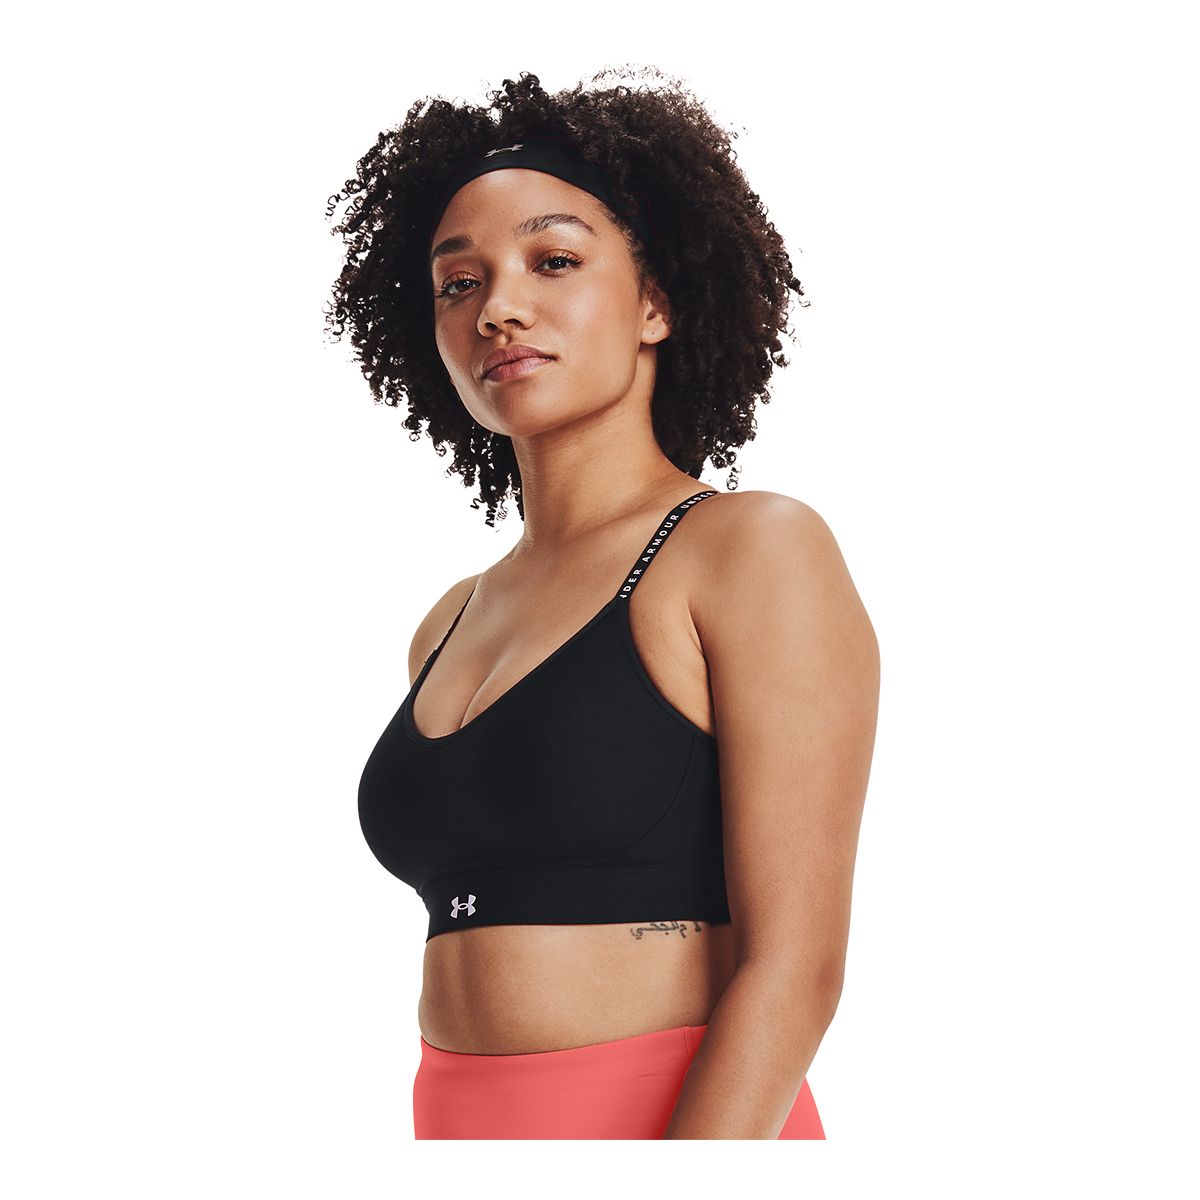 https://media-www.sportchek.ca/product/div-03-softgoods/dpt-70-athletic-clothing/sdpt-02-womens/333881495/ea-ua-women-s-infinity-low-covered-sports-bra-blk-99d6a837-d6a0-4551-aefd-f046fbffab08-jpgrendition.jpg